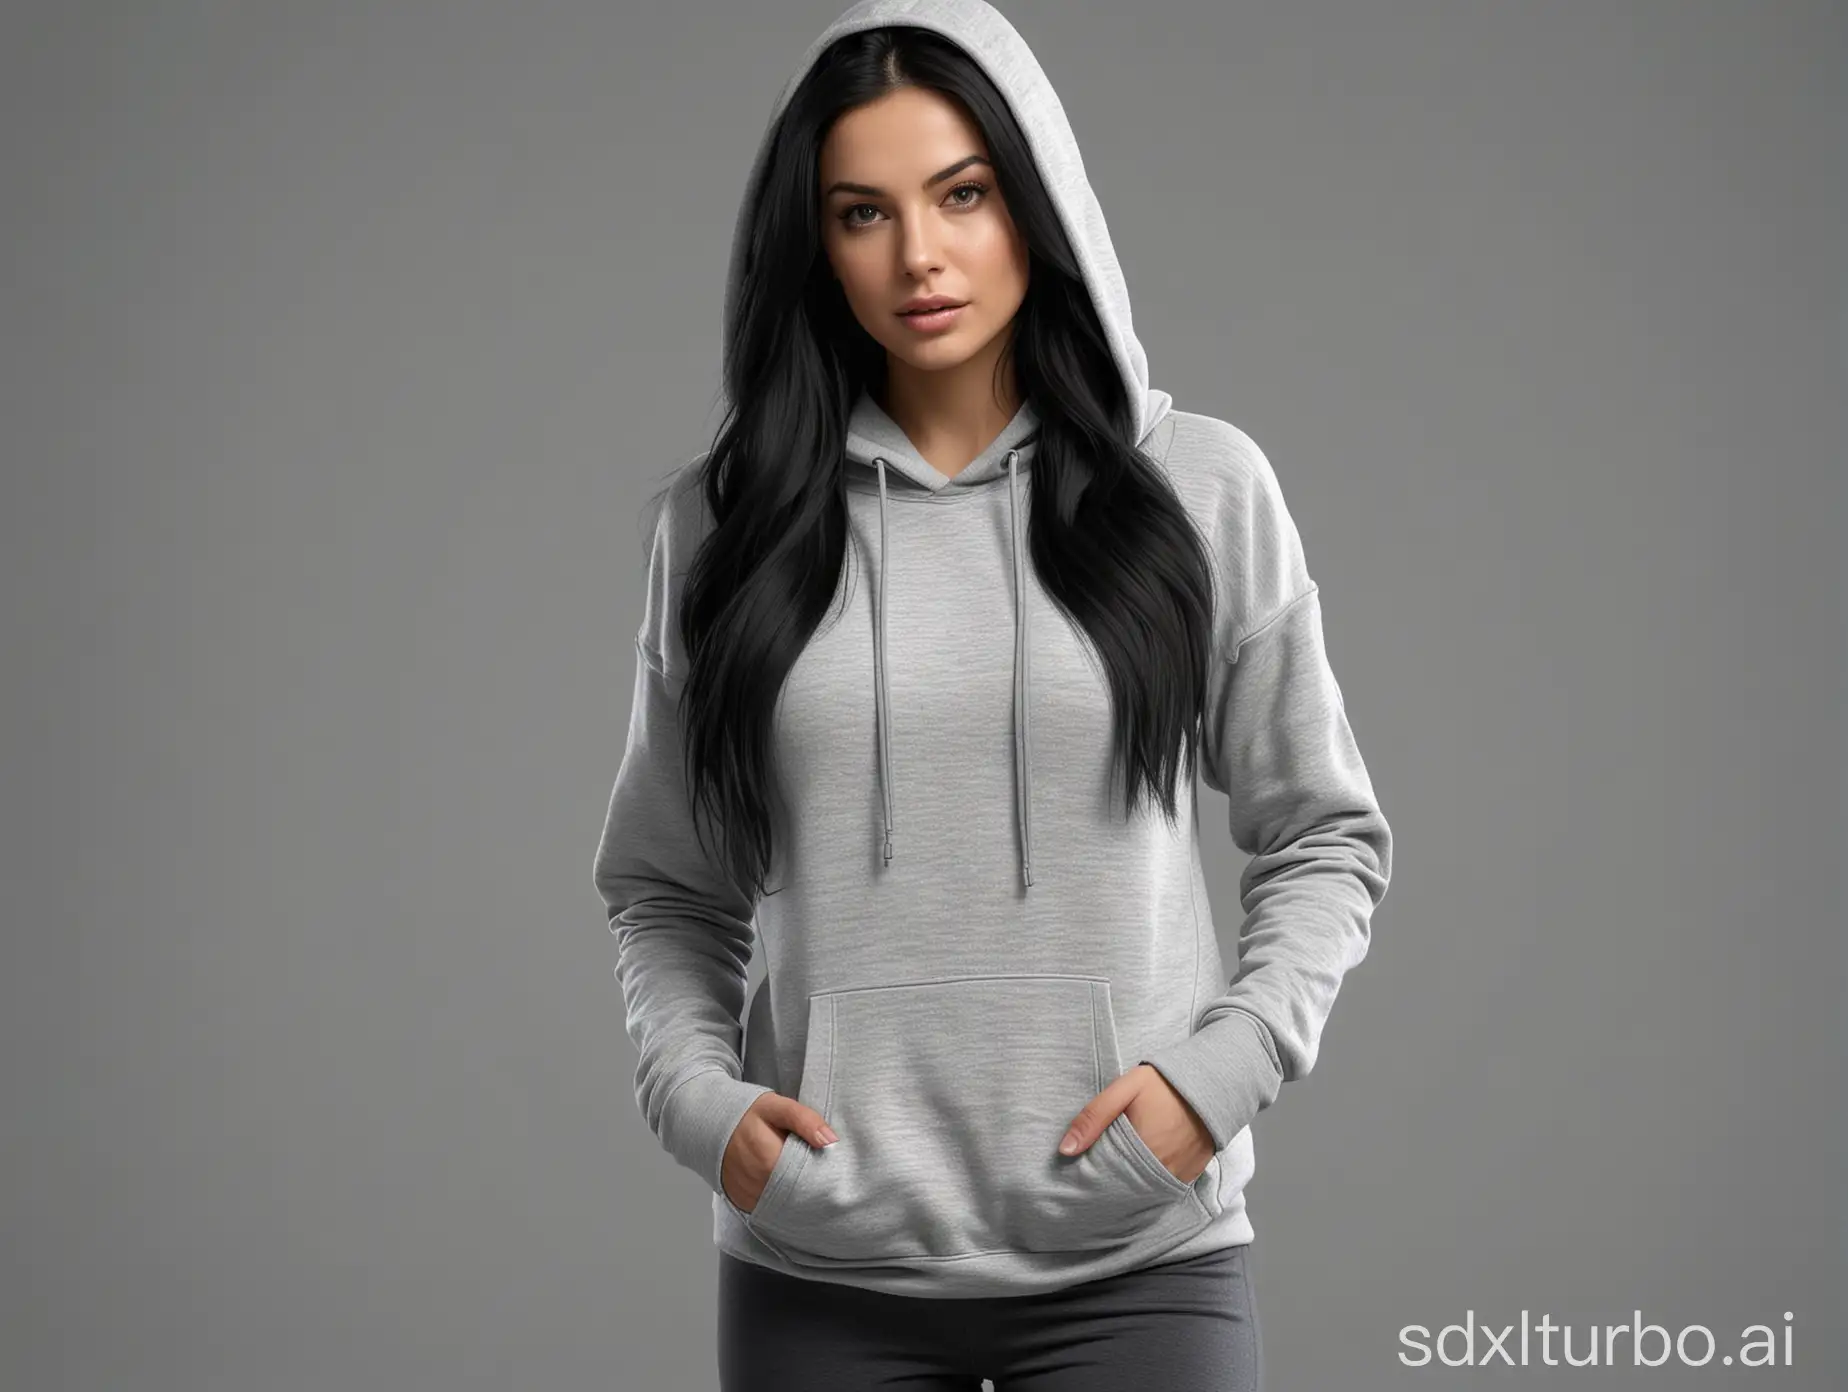 Stylish-30YearOld-Woman-in-Gray-Hoodie-and-Black-Leggings-High-Detail-Photorealistic-Portrait